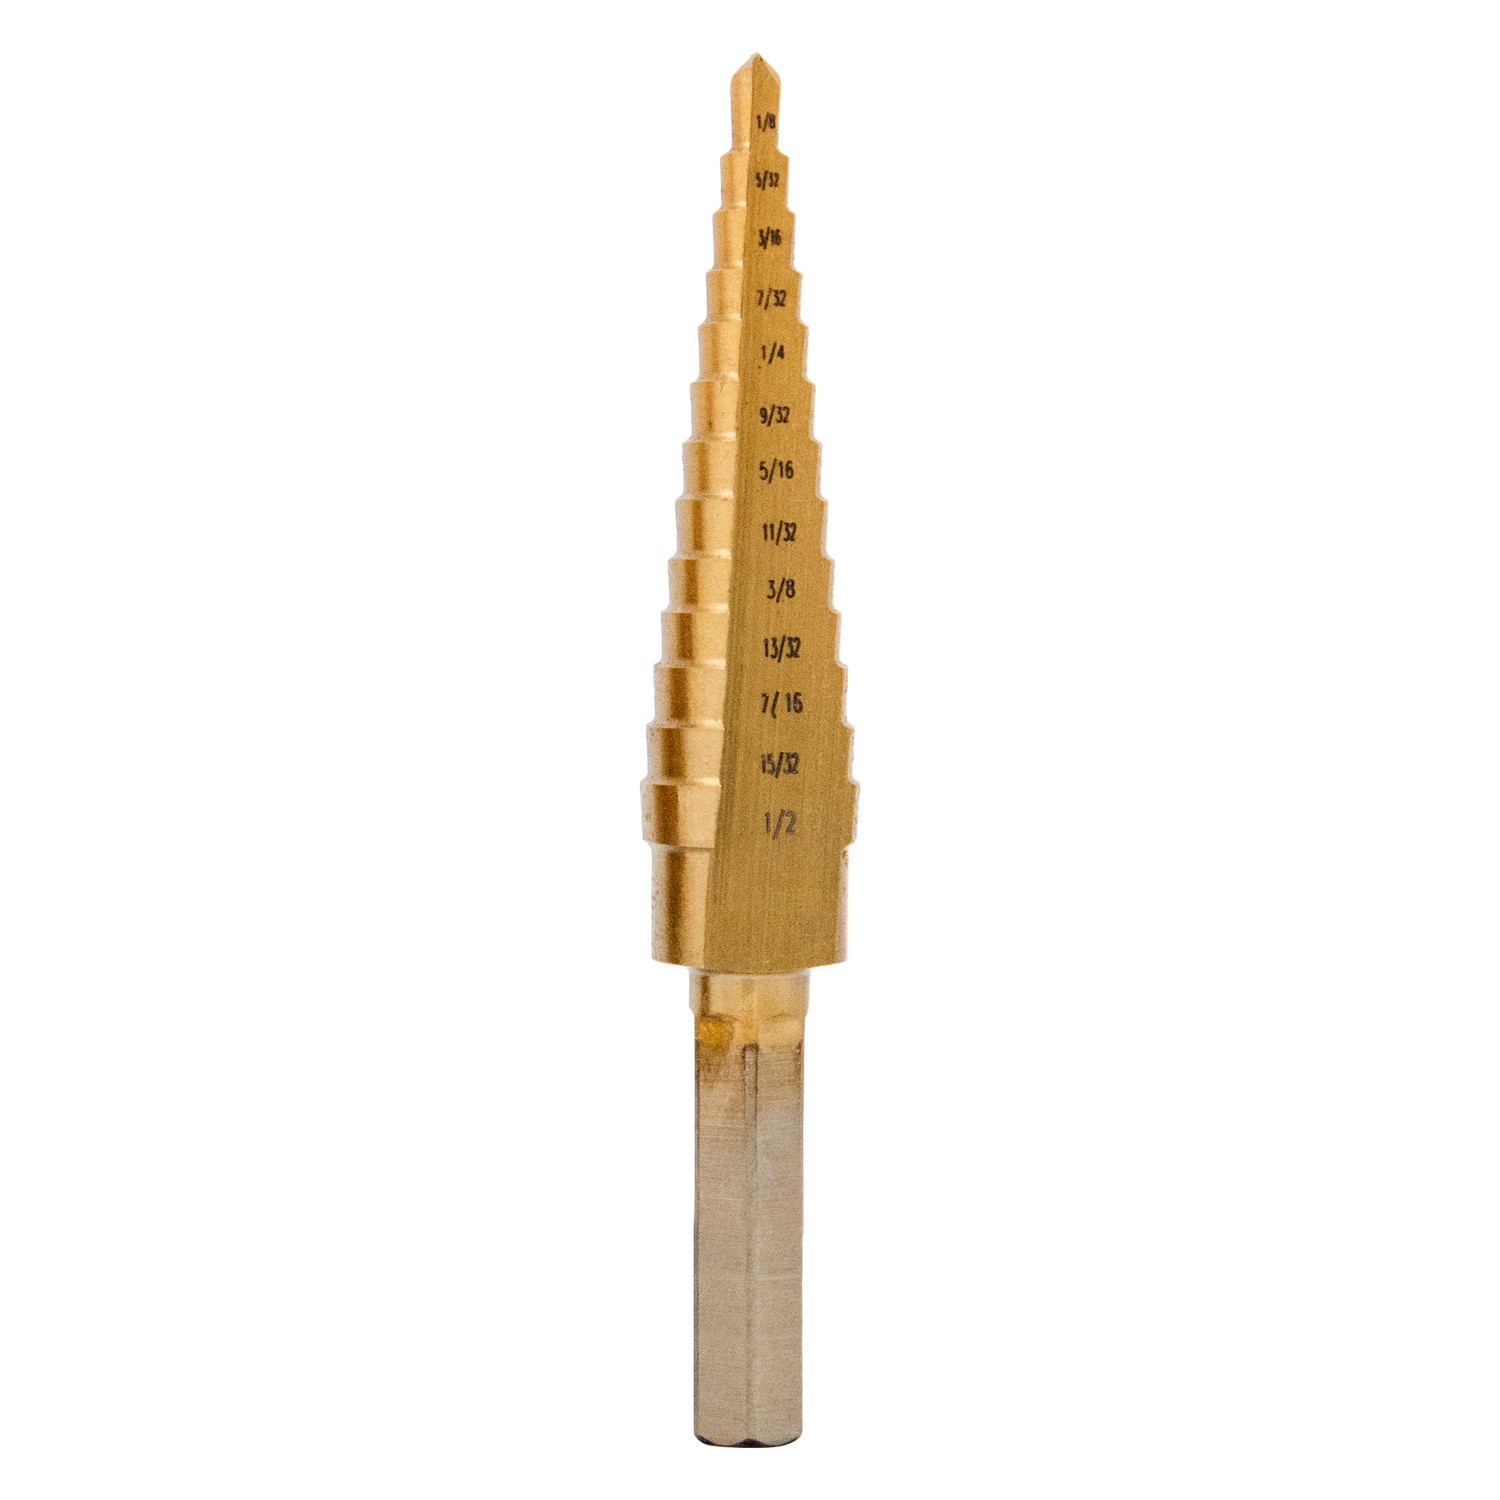 HSS Titanium Coated Step Drill - 1/8" to 1/2" - 13 sizes